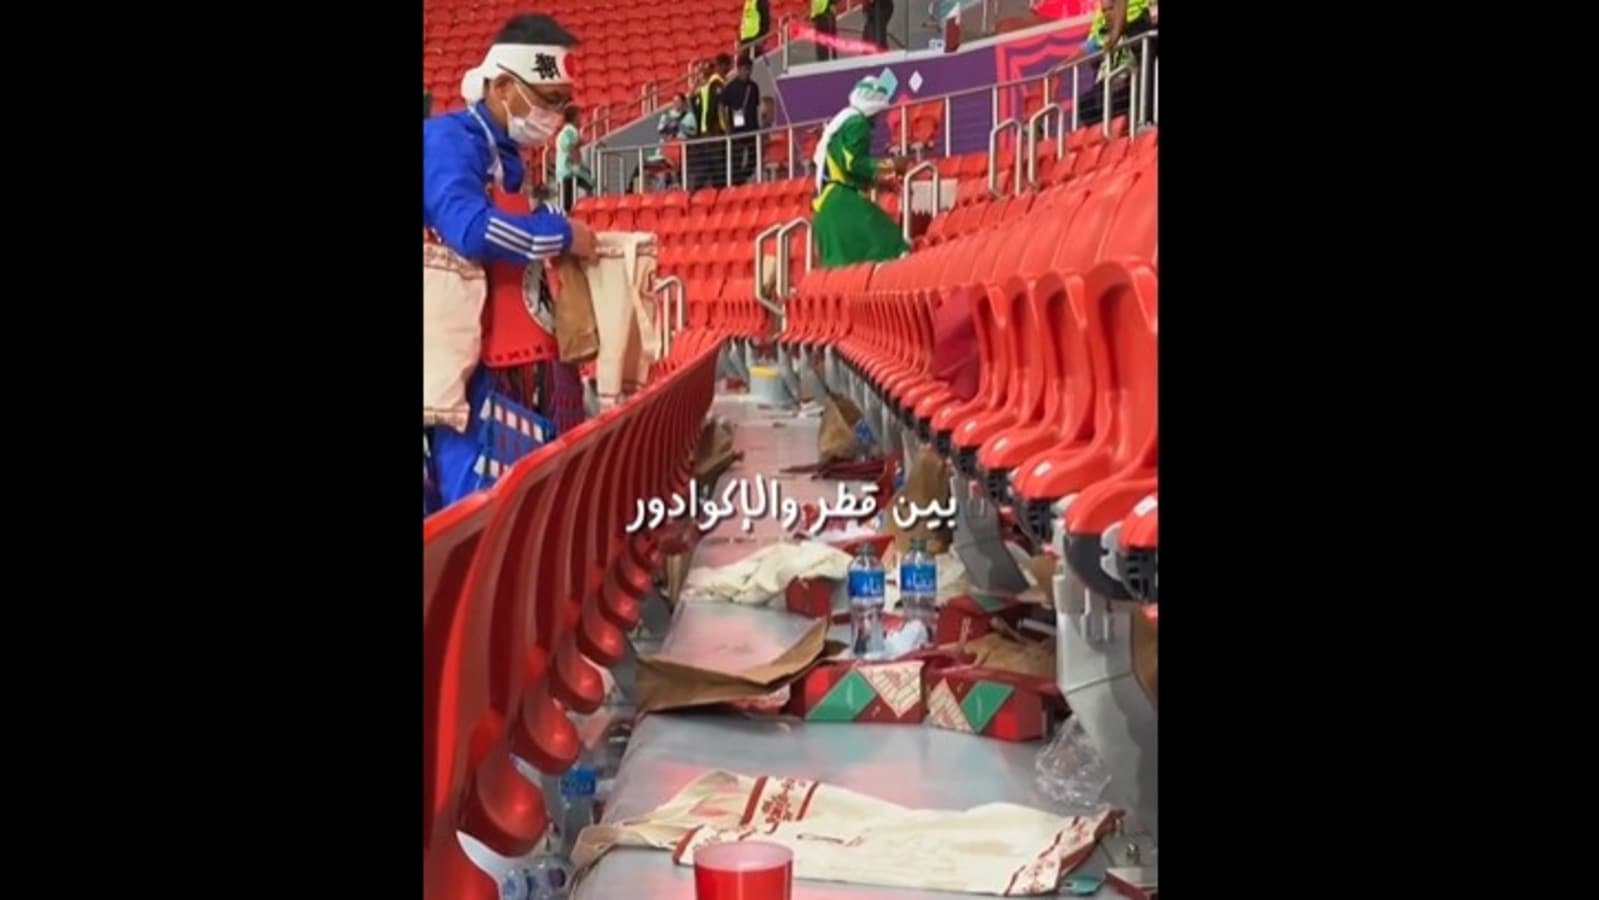 FIFA World Cup 2022: Japanese fans take charge to clean the stadium after match